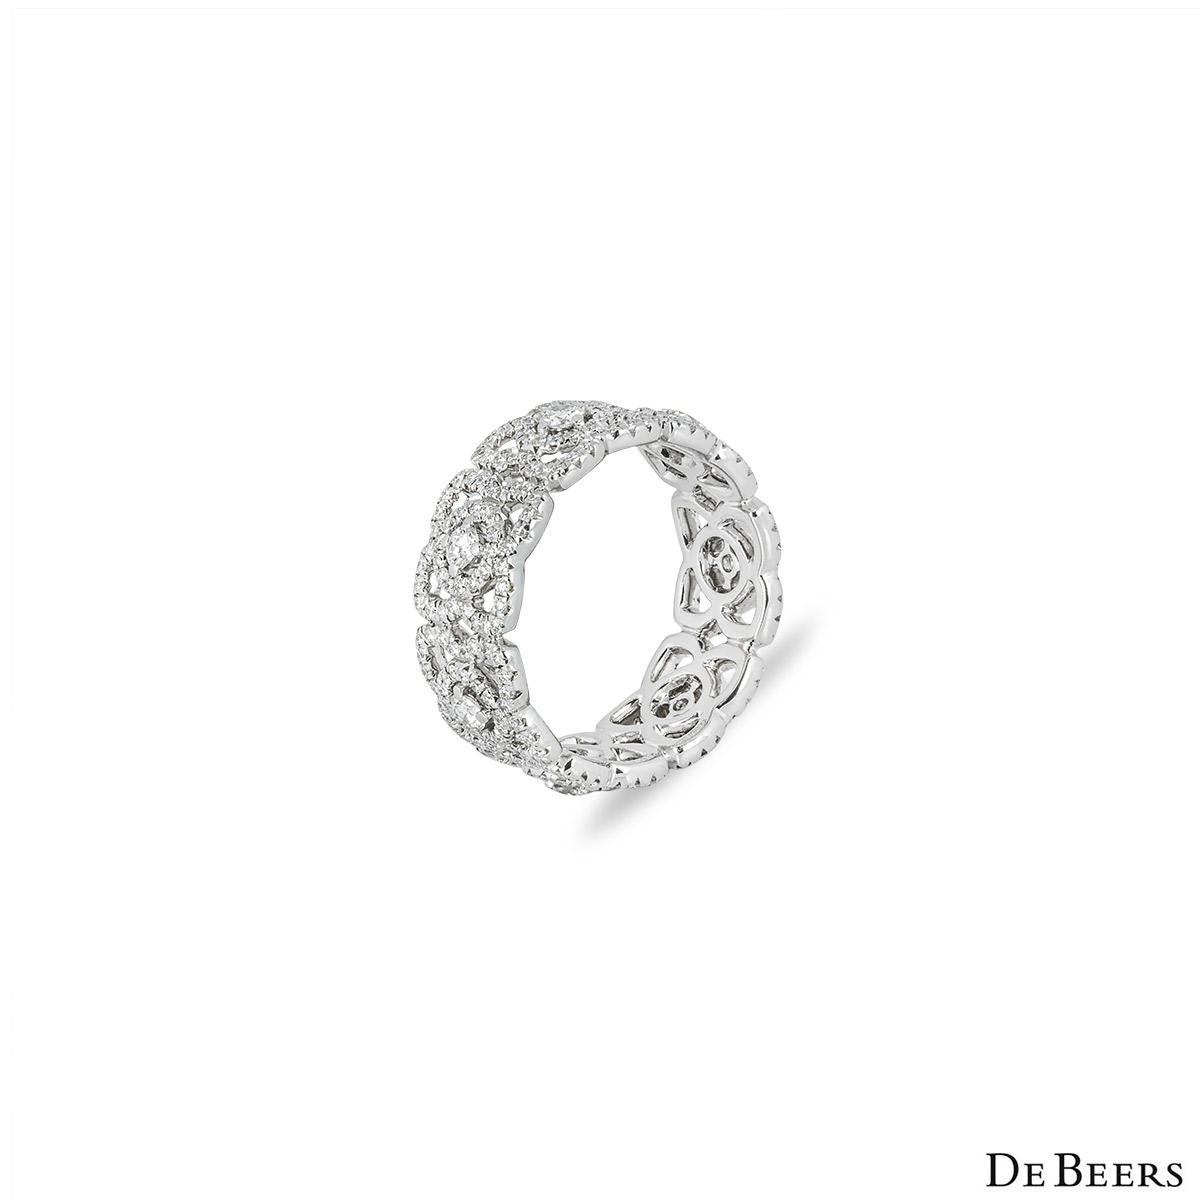 An elegant 18k white gold diamond ring by De Beers from the Enchanted Lotus collection. The band is set with 7 openwork lotus motifs pave set throughout with 301 round brilliant cut diamonds with an approximate total weight of 1.22ct, E-G colour and